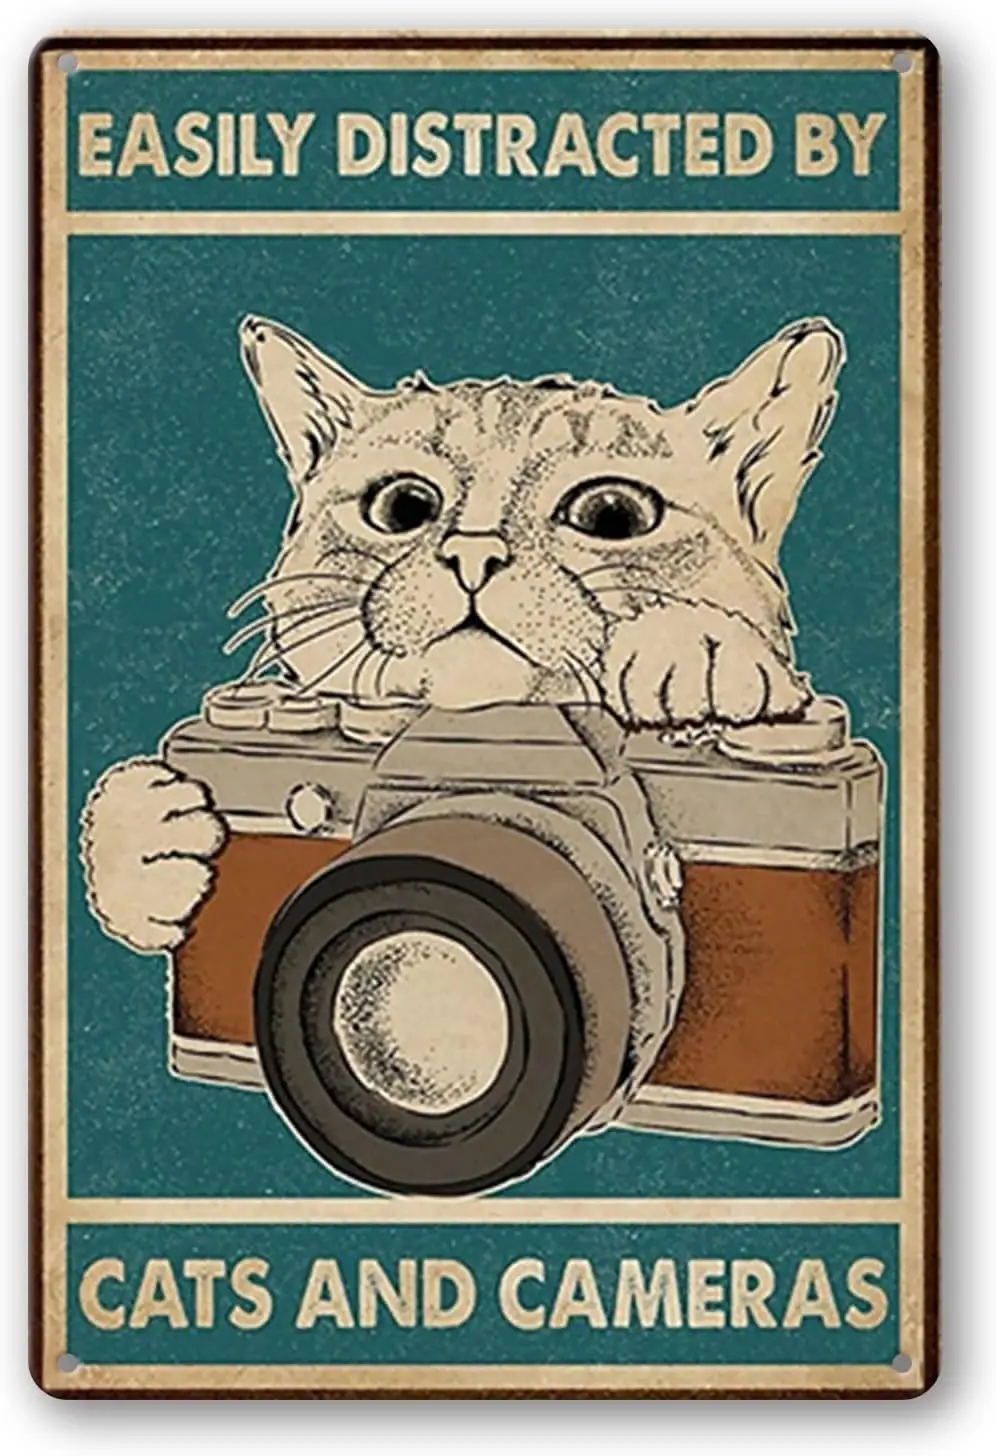 

Easily Distracted by Cats and Cameras, Funny Tin Sign Bar Pub Diner Cafe Wall Decor Home Decor Art Metal Poster 8 x